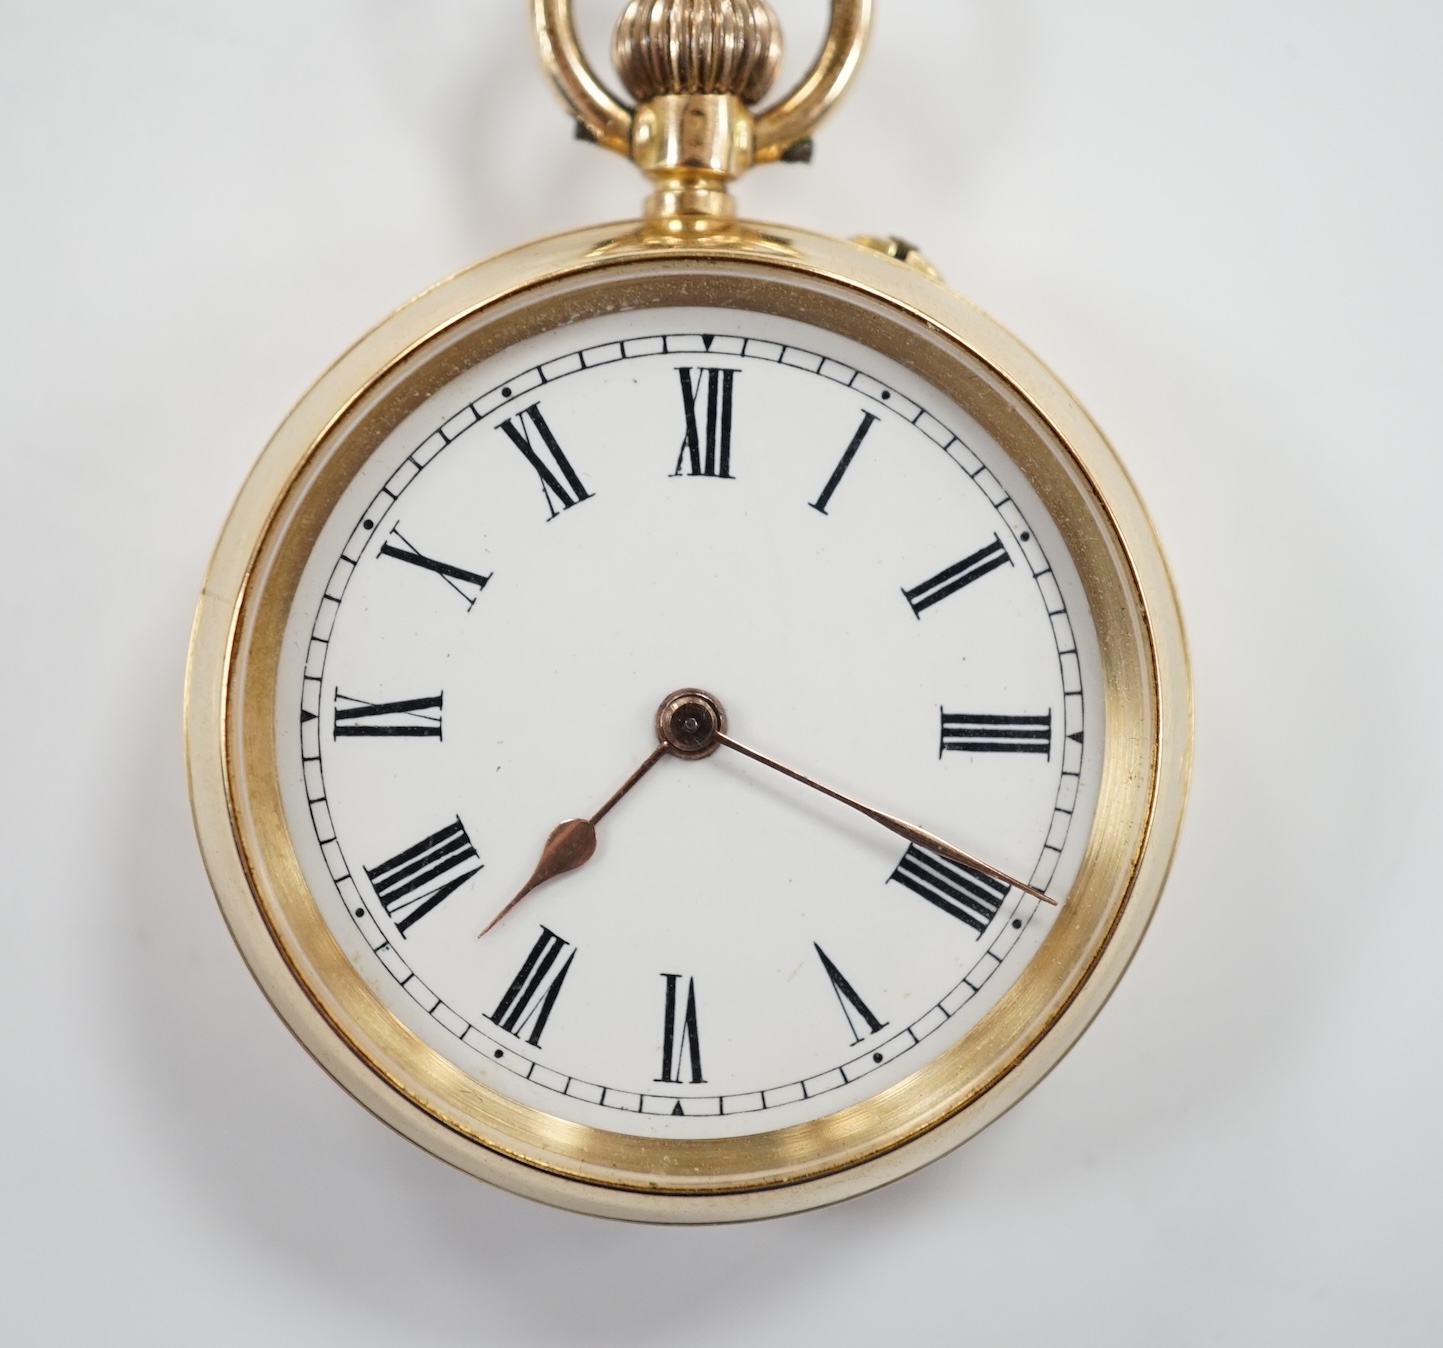 A 14k open face keyless fob watch, with Roman dial, case diameter 32mm, with case back monogram,